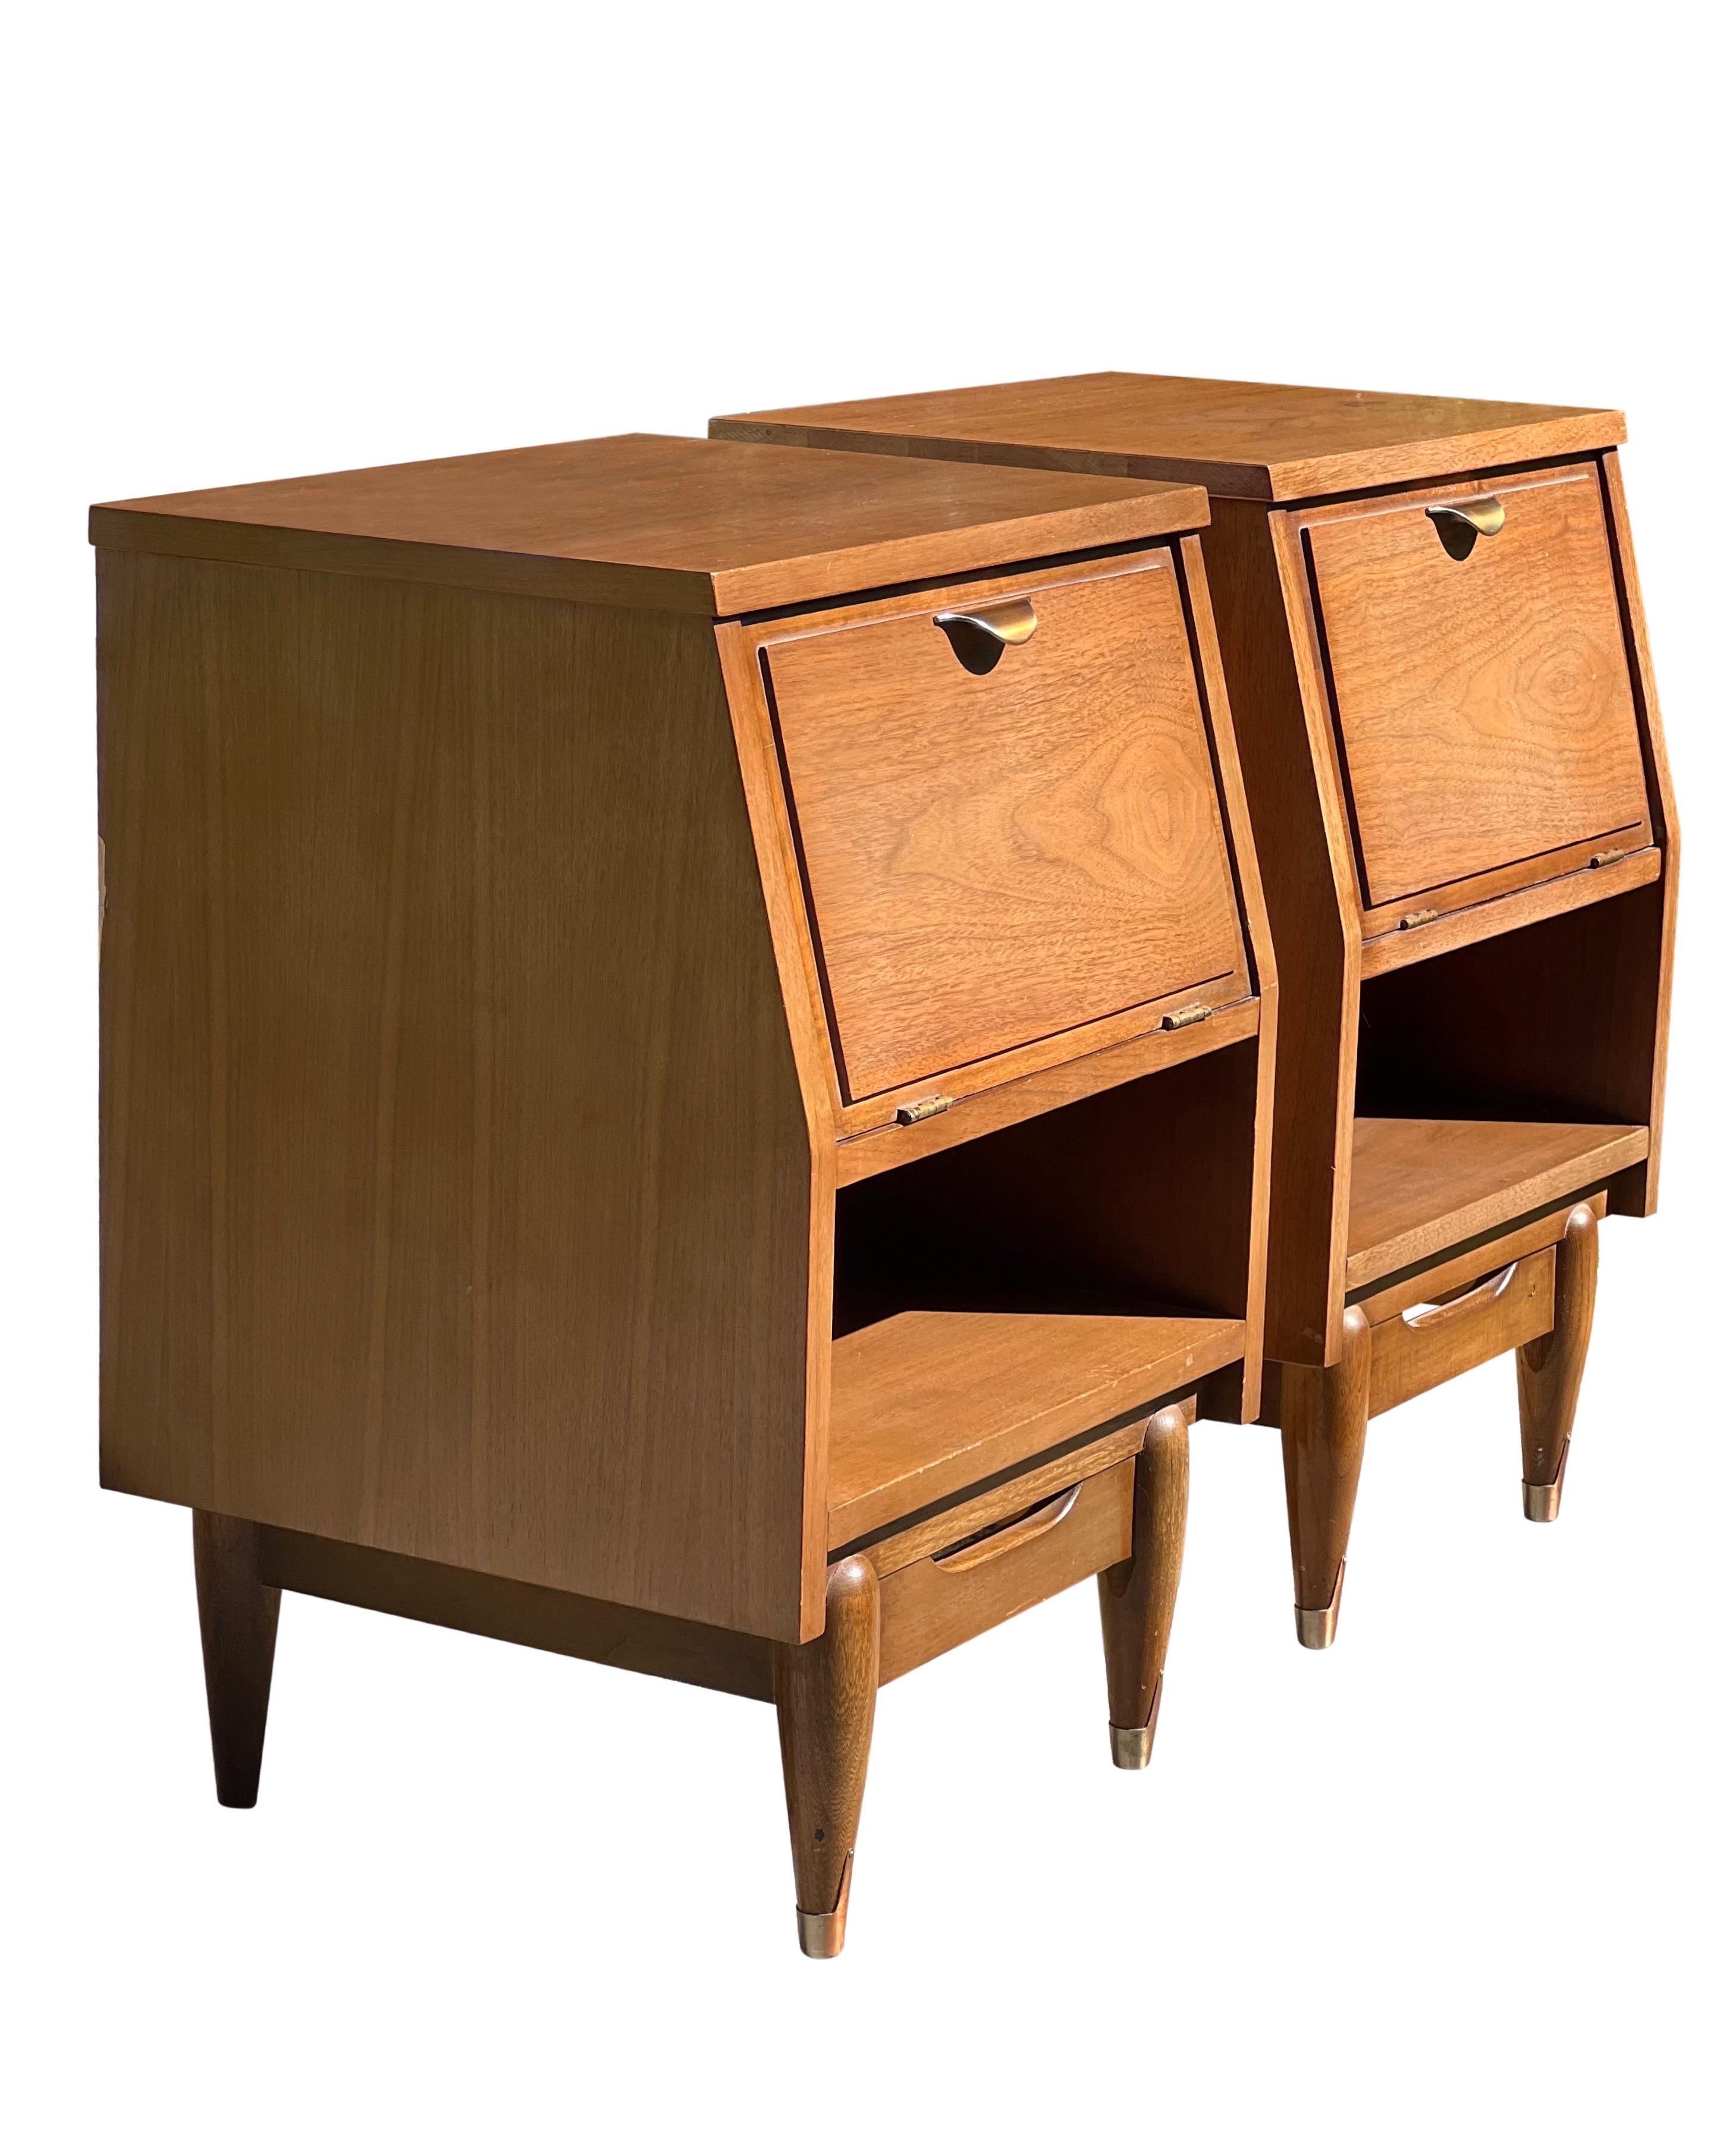 Handsome pair of Mid Century walnut nightstands.

The nightstands feature a drop-front cabinet door with a brass pull and open storage beneath. Tapered legs and decorative brass sabots. A super sturdy pair with great style and a unique silhouette.